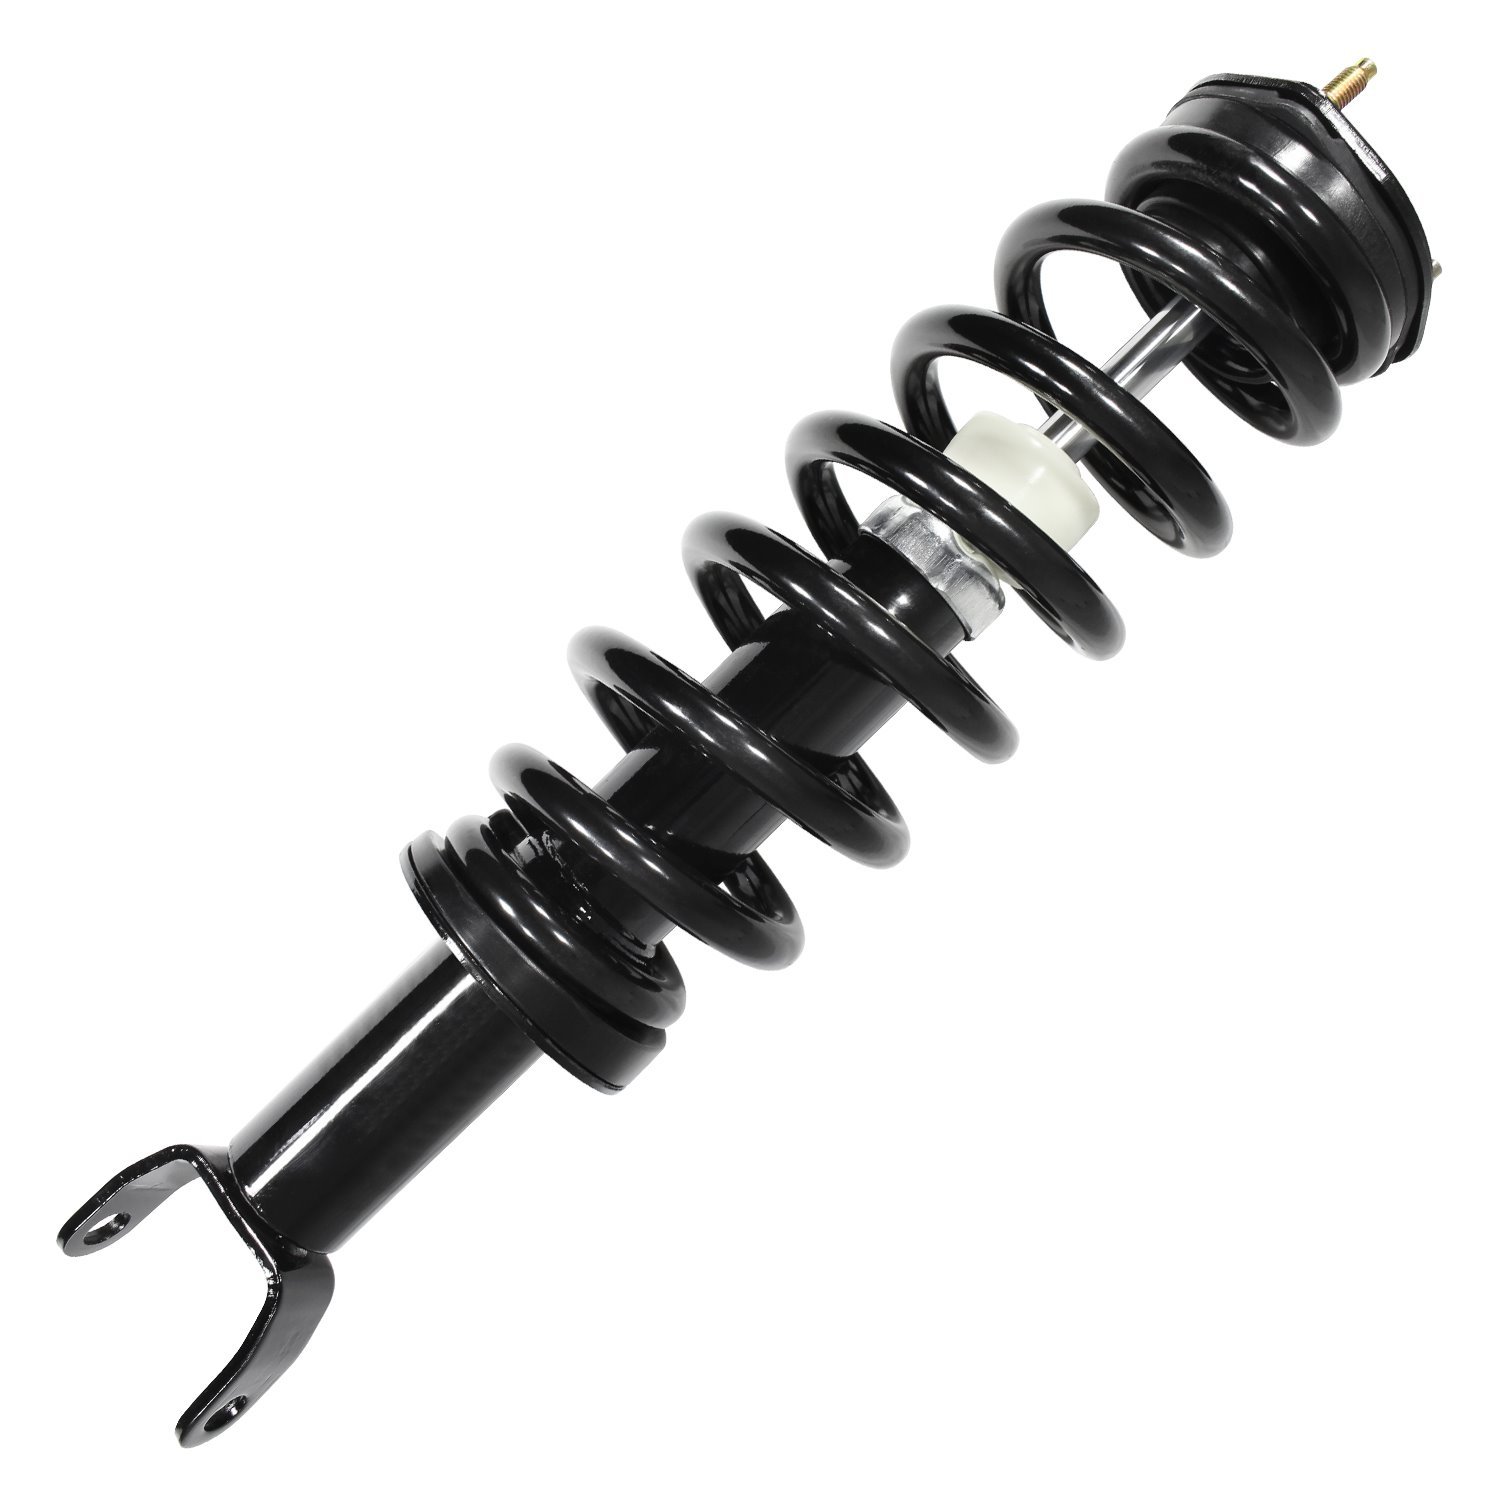 11620 Suspension Strut & Coil Spring Assembly Fits Select Ram 1500, Ram 1500 Classic, Dodge Ram 1500